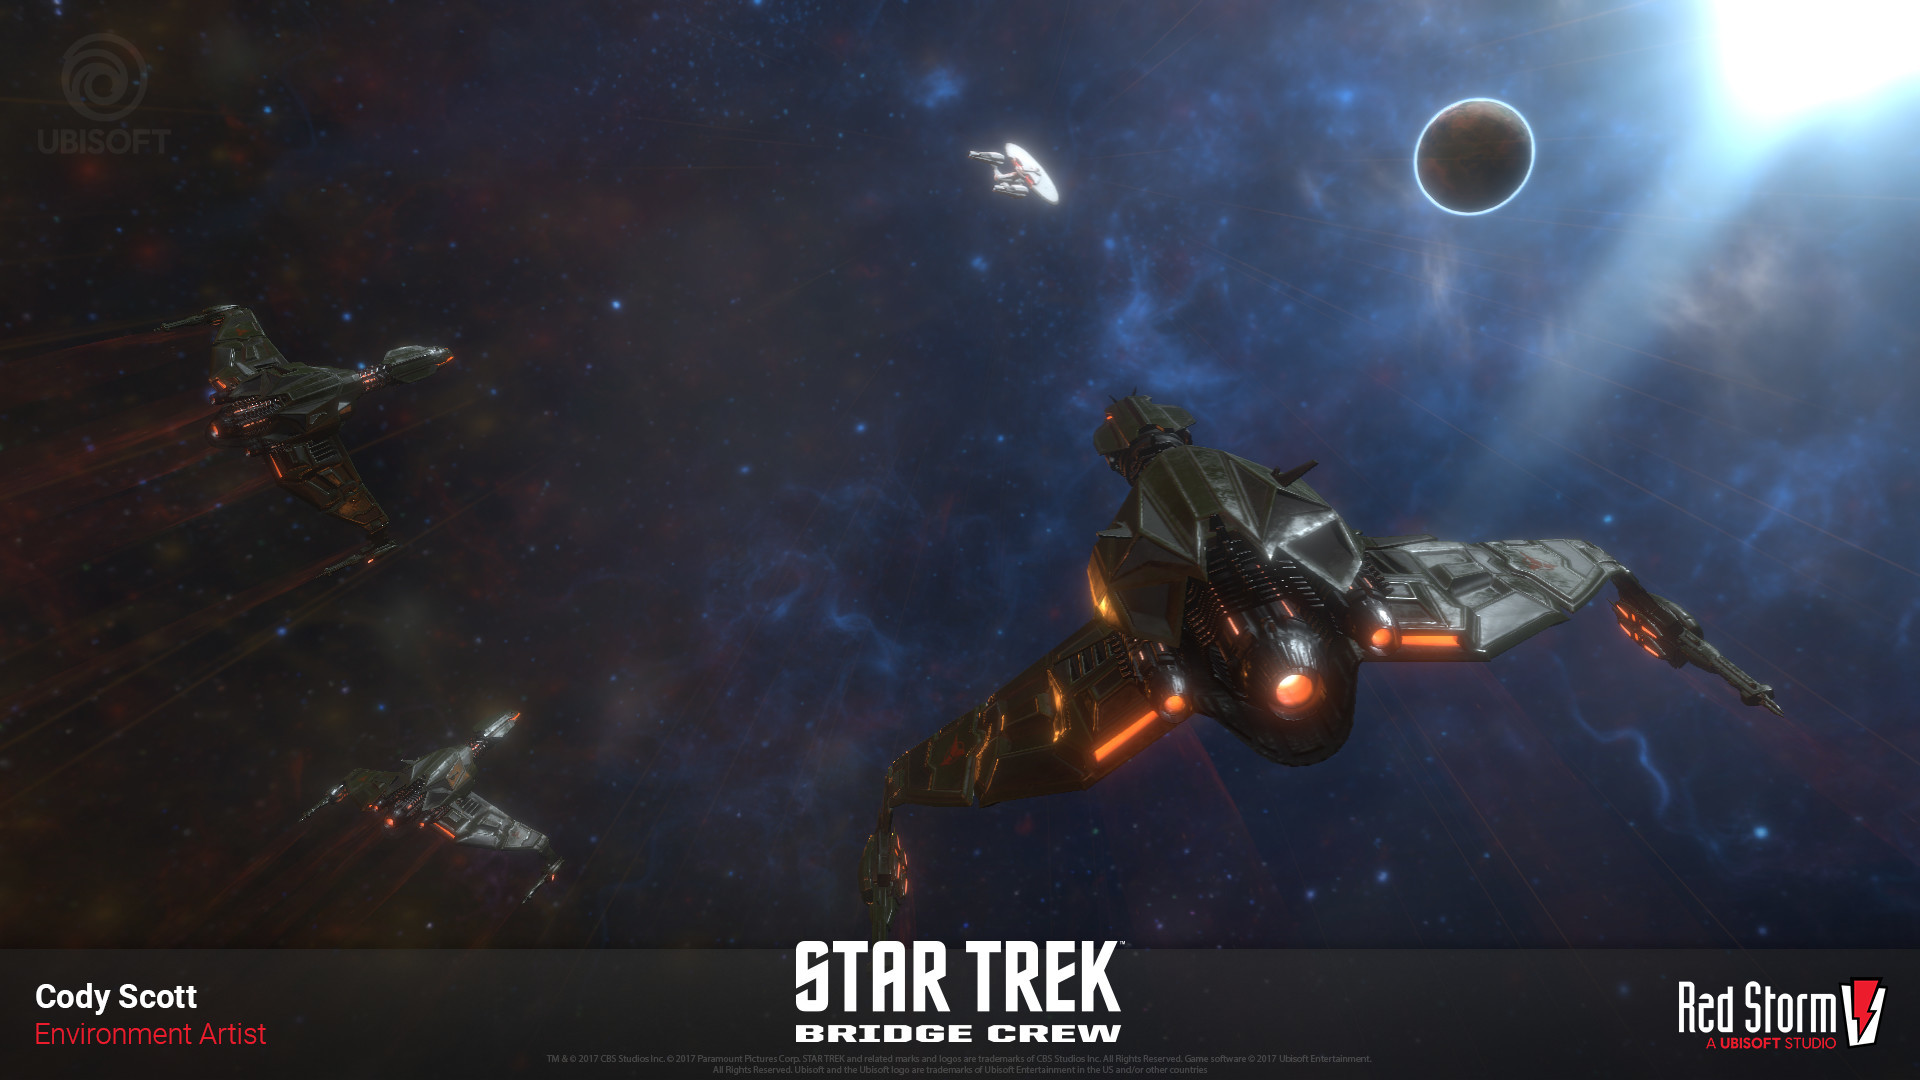 1920x1080 Wallpaper I worked on for the game. I modeled and textured the klingon  ships, I set up and lit the scene. Other artist at Red Storm made the  skybox, ...